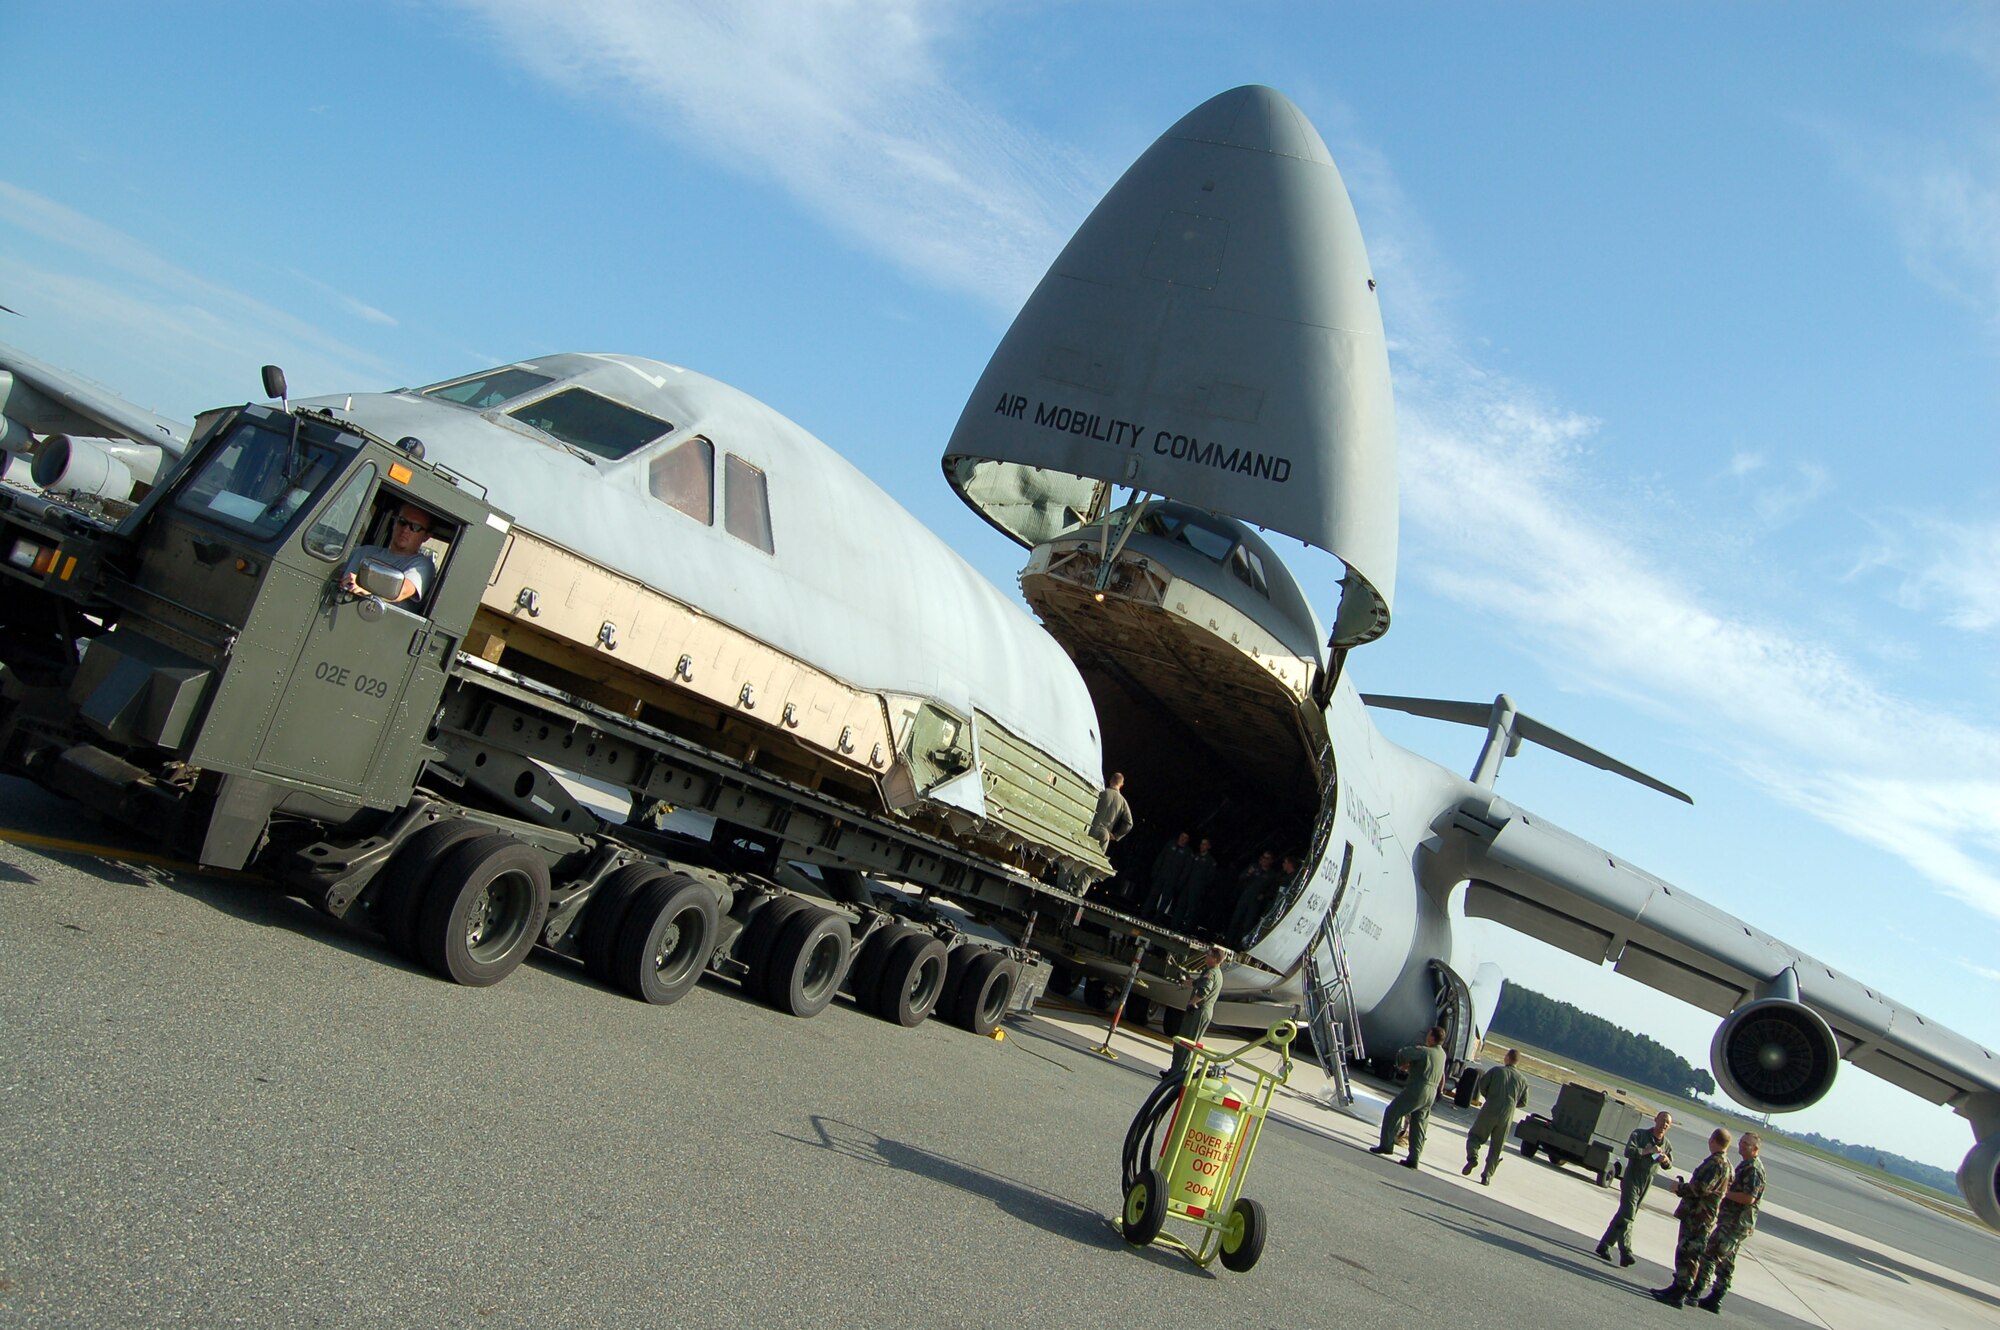 Airmen from Dover Air Force Base, Del., load a C-5 Galaxy flight deck onto another C-5 for transport to Robins Air Force Base, Ga., Aug. 22. The flight deck from the C-5 that crashed April 3 will be used as a simulator to help train and test aircrews. (U.S. Air Force photo/Airman 1st Class James Bolinger)
